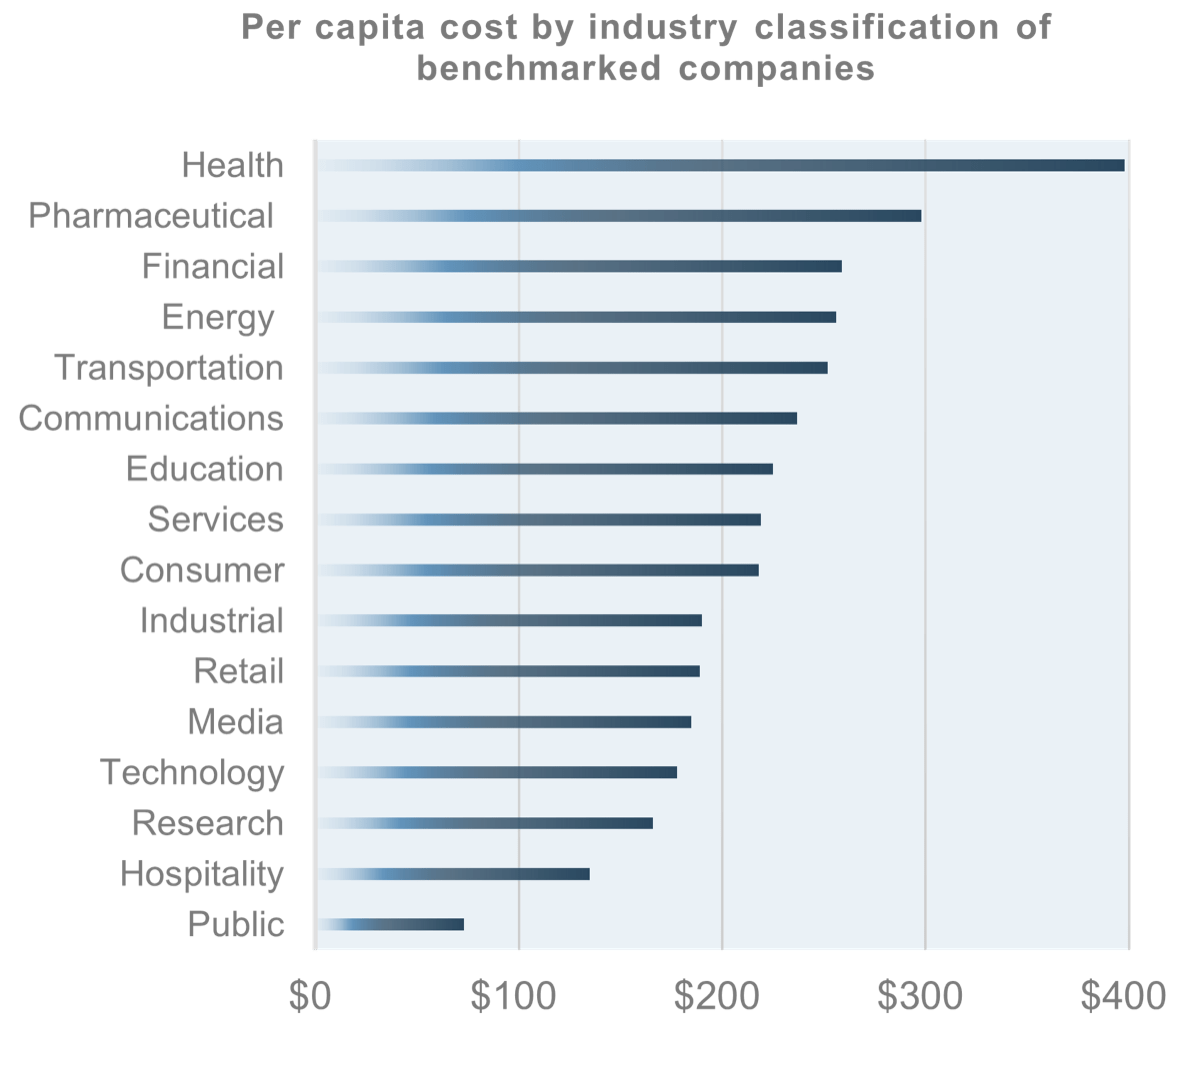 Horizontal bar chart of 'Per capita cost by industry classification of benchmarked companies', with the highest cost attributed to 'Health', 'Pharmaceutical', 'Financial', 'Energy', and 'Transportation'.